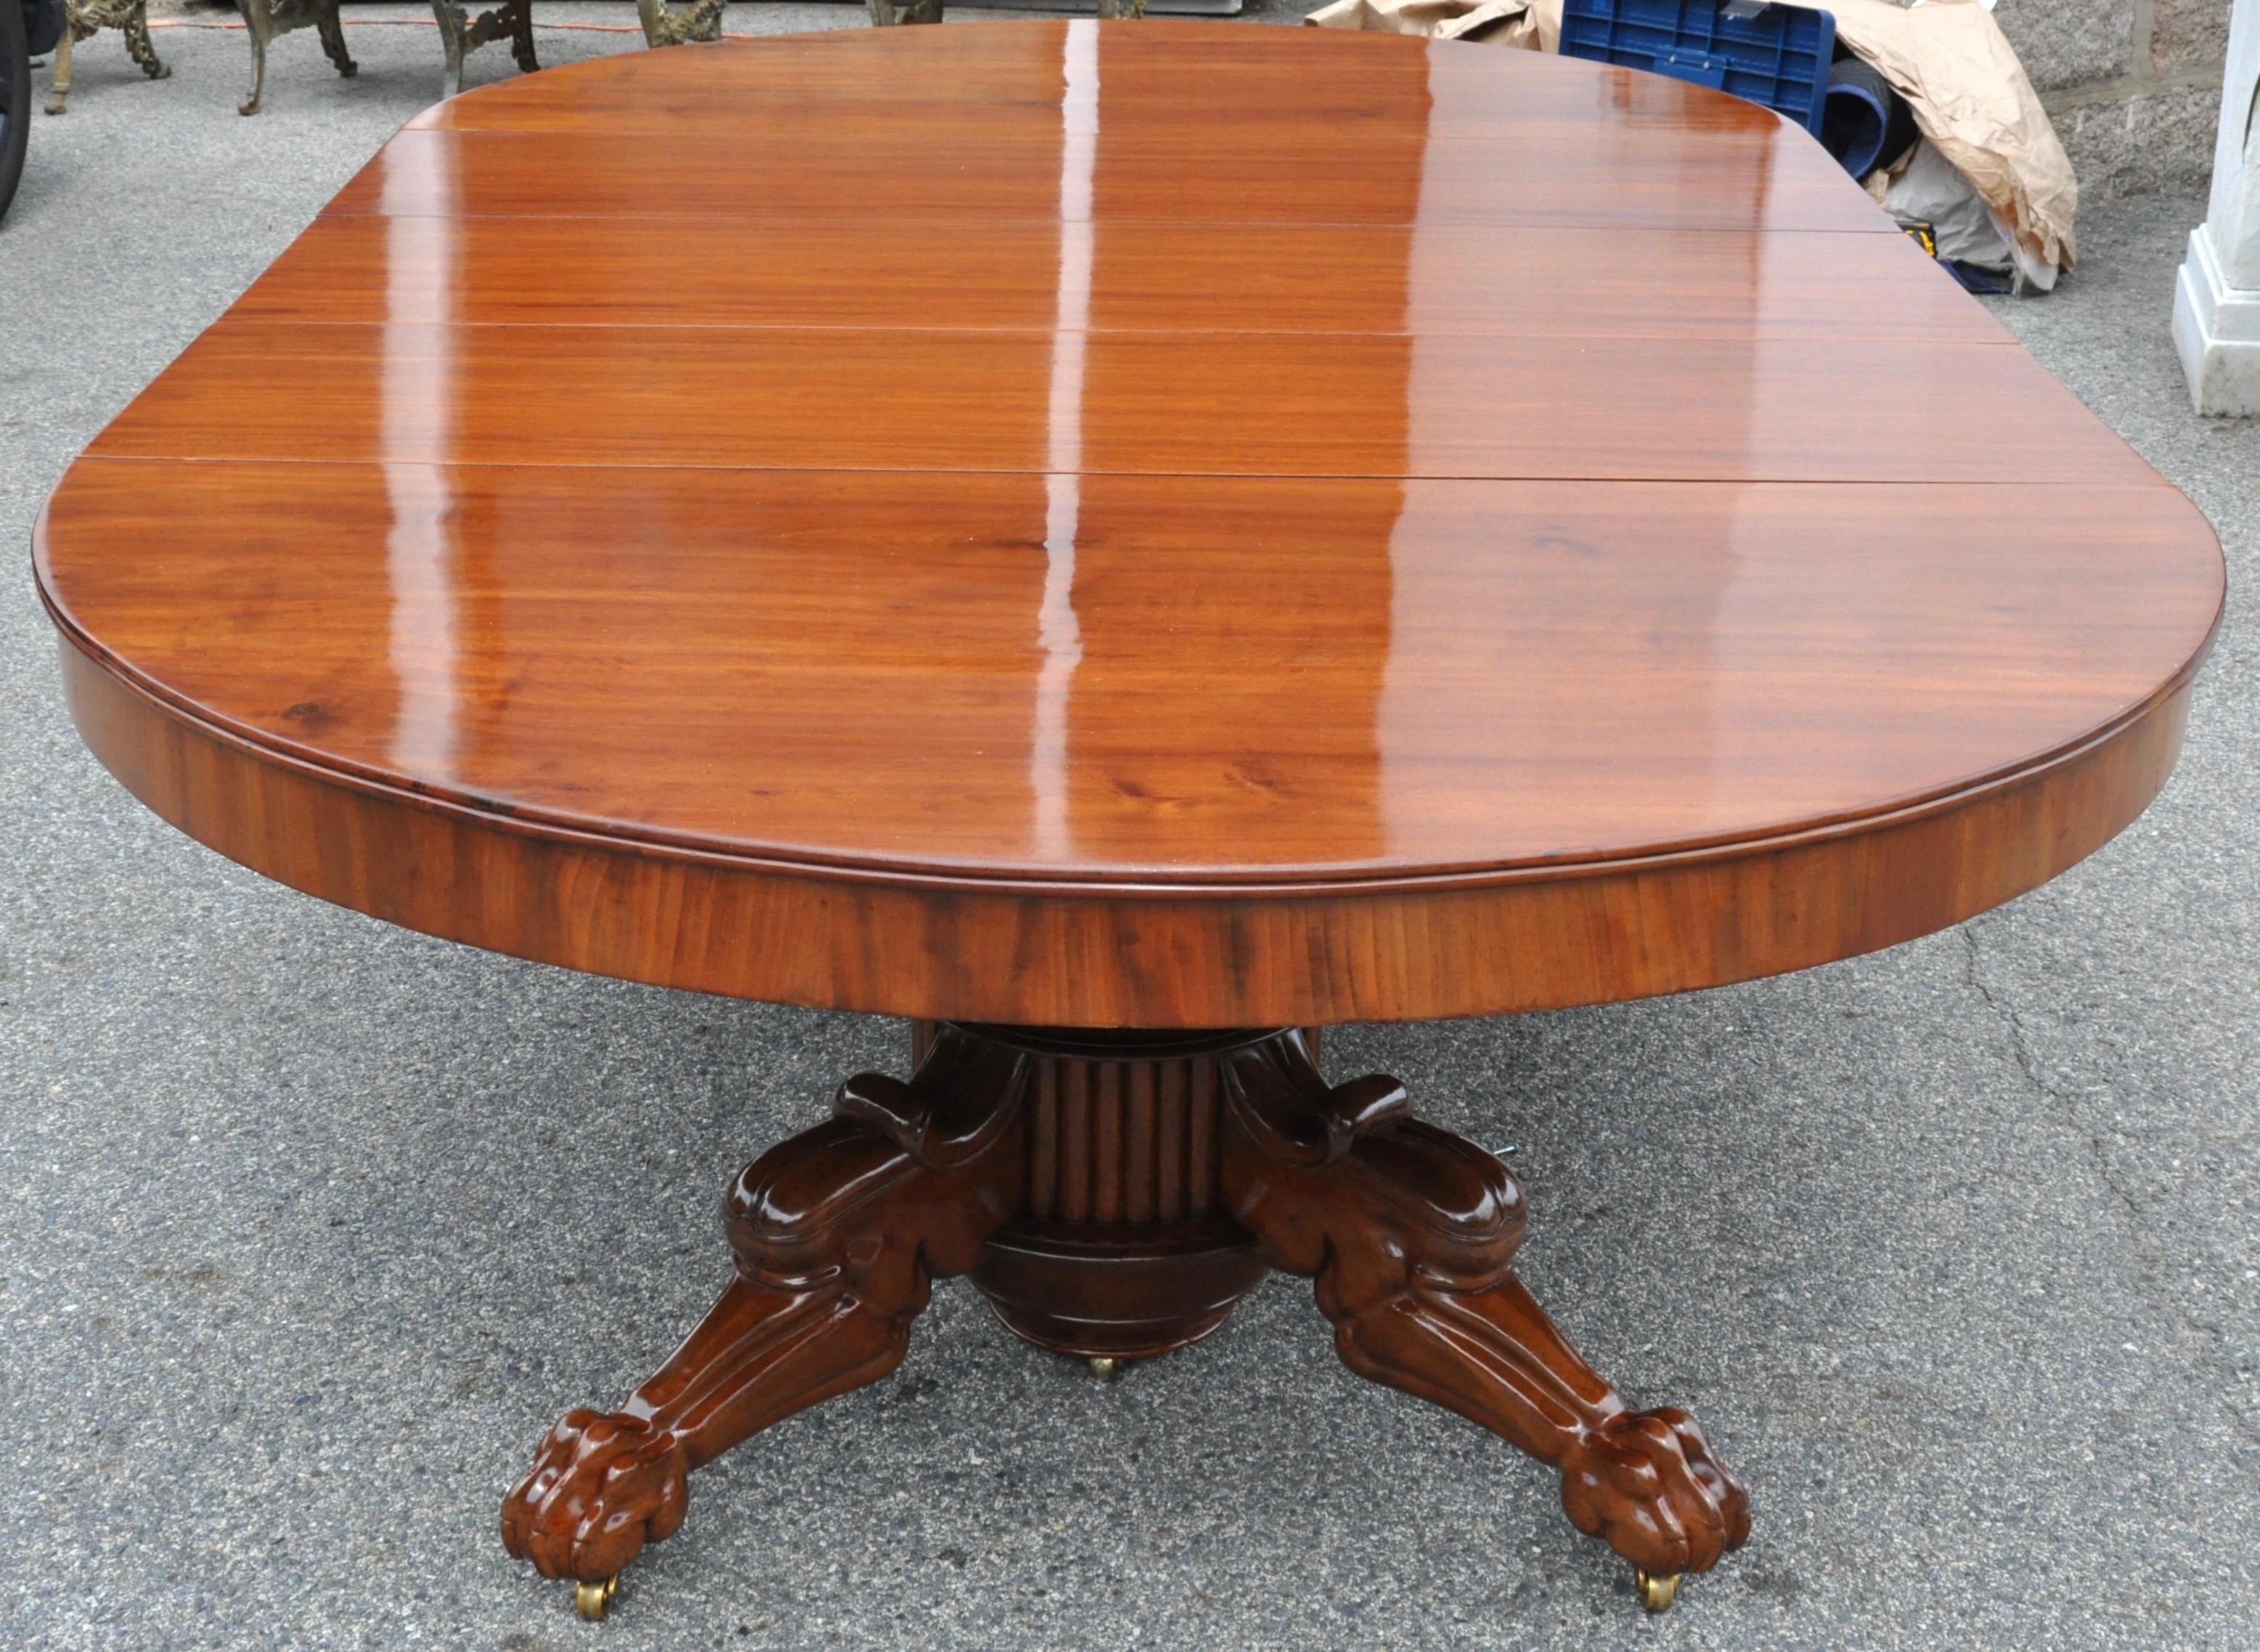 Period Early 19th Century Neoclassical Walnut Round Expanding Dining Table 3